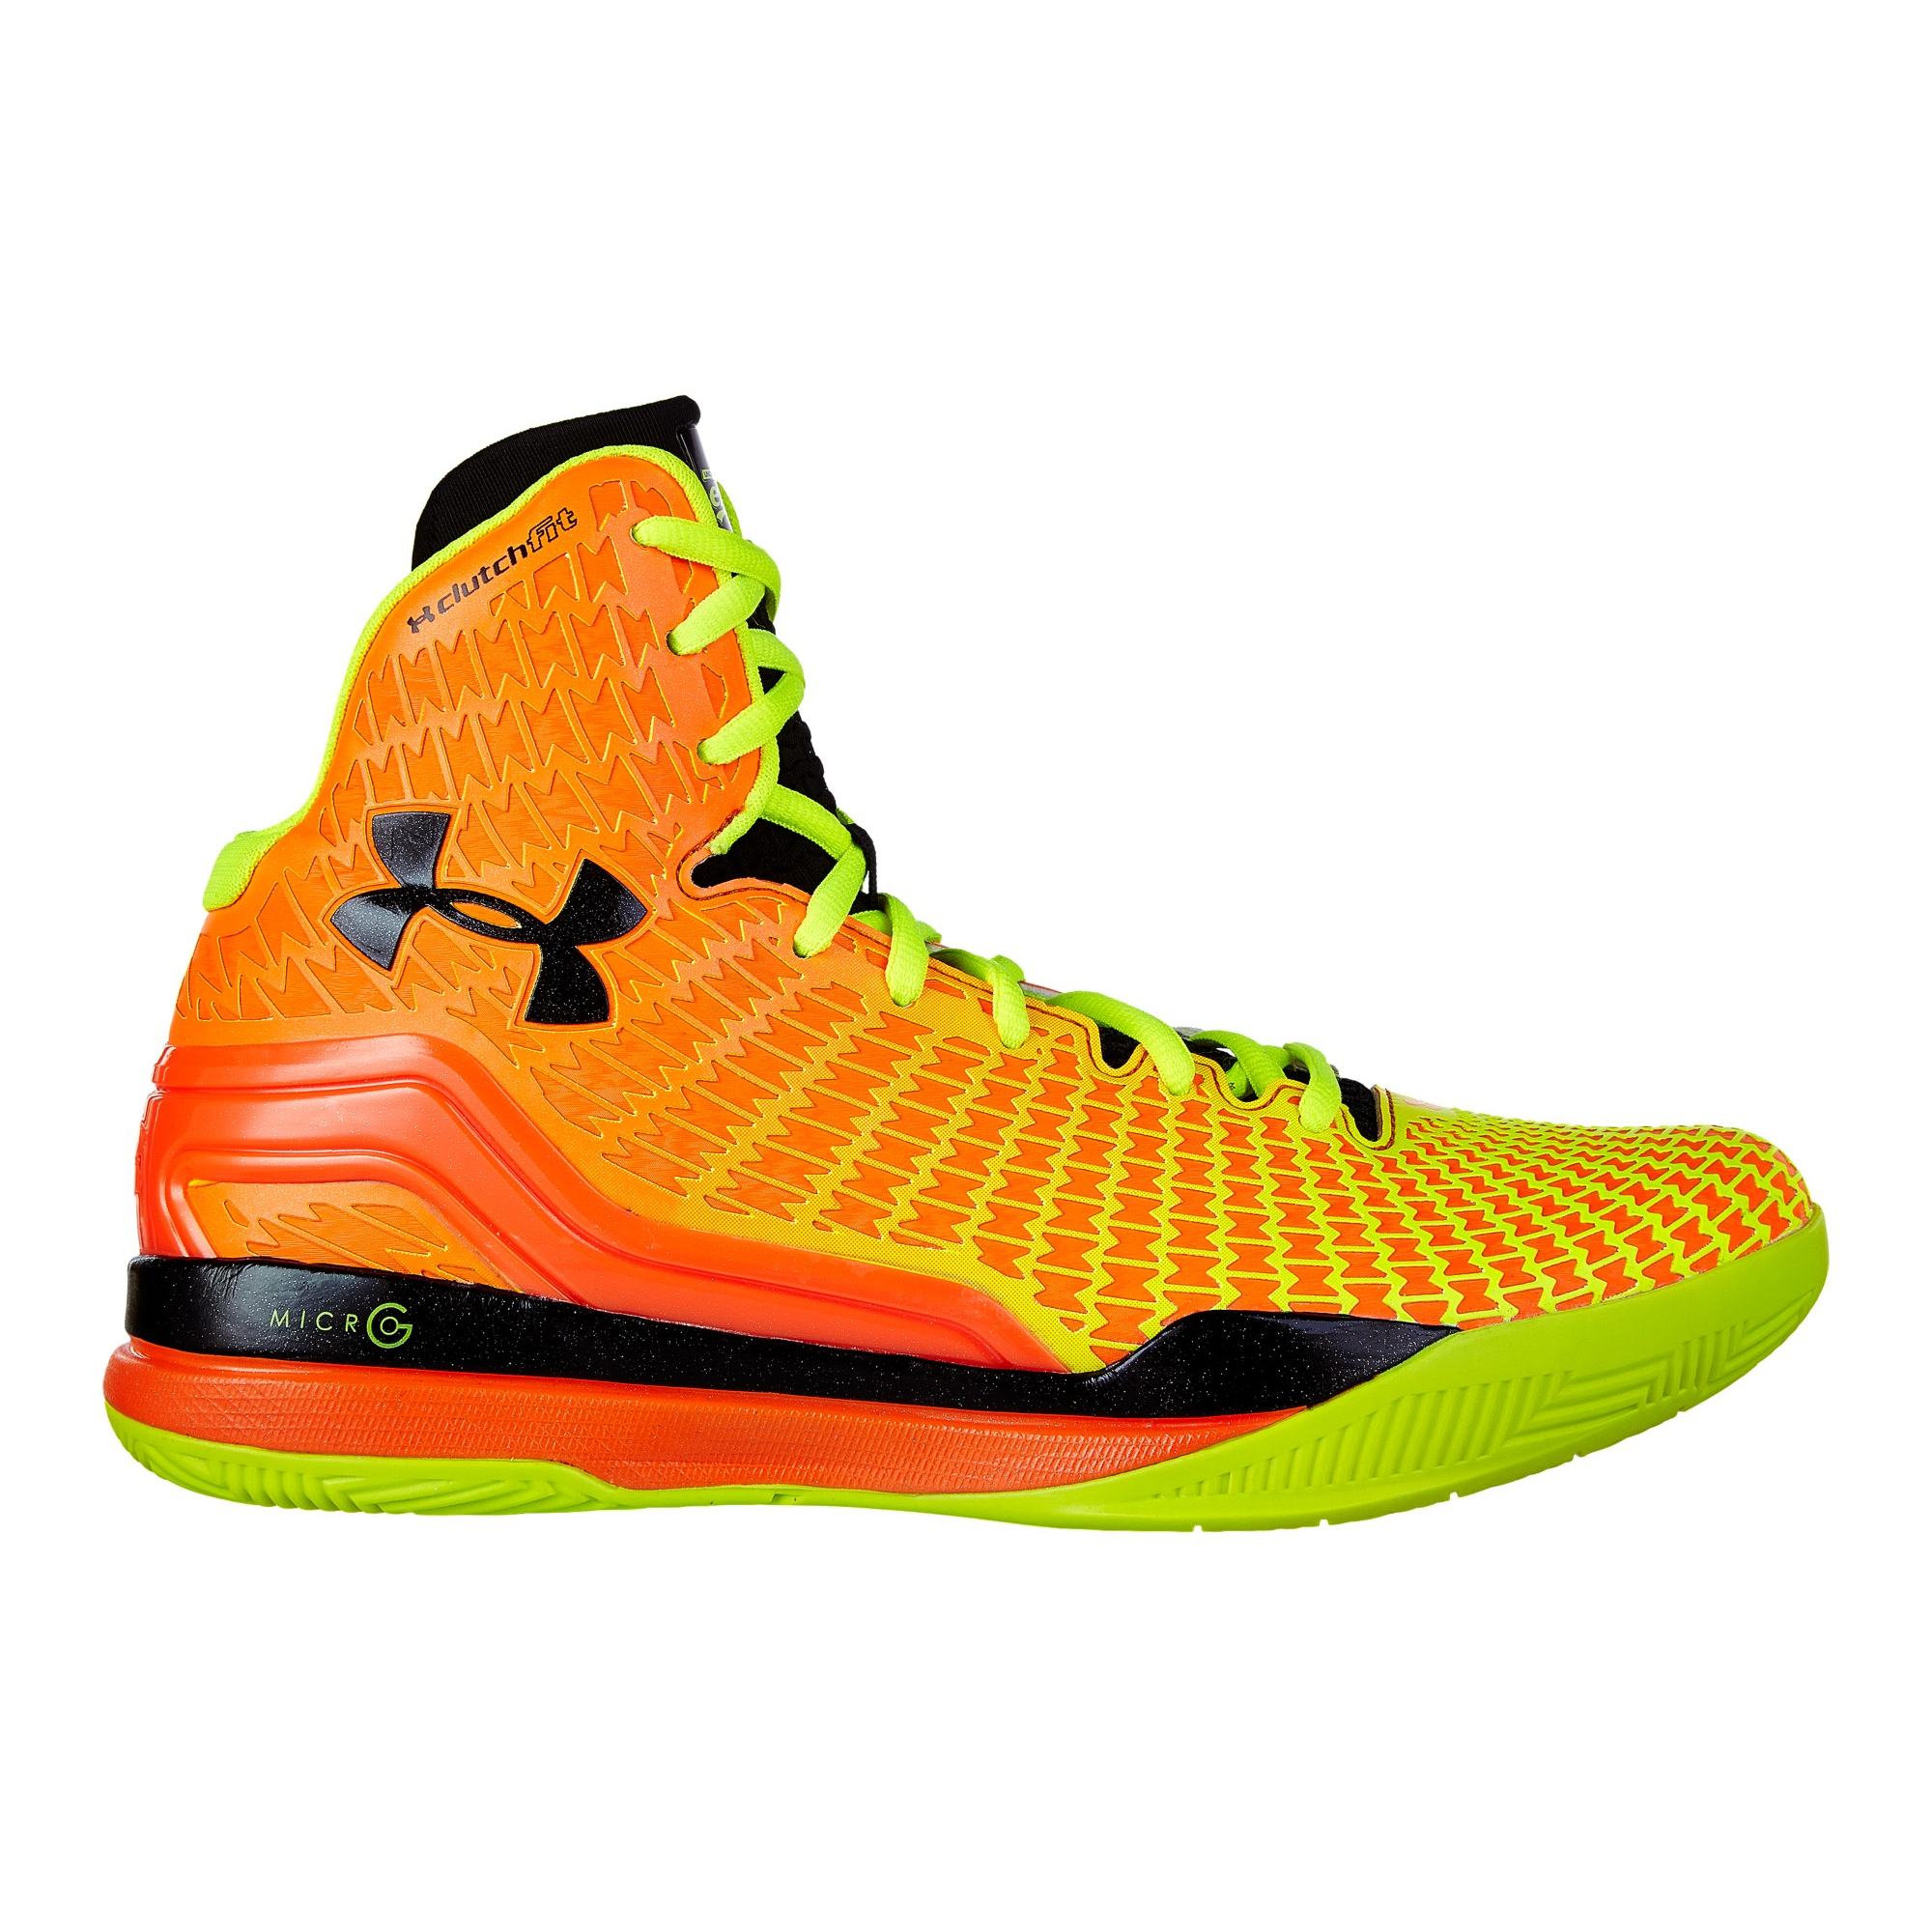 Buy cheap curry 2 waves,labron 9,shoes sale